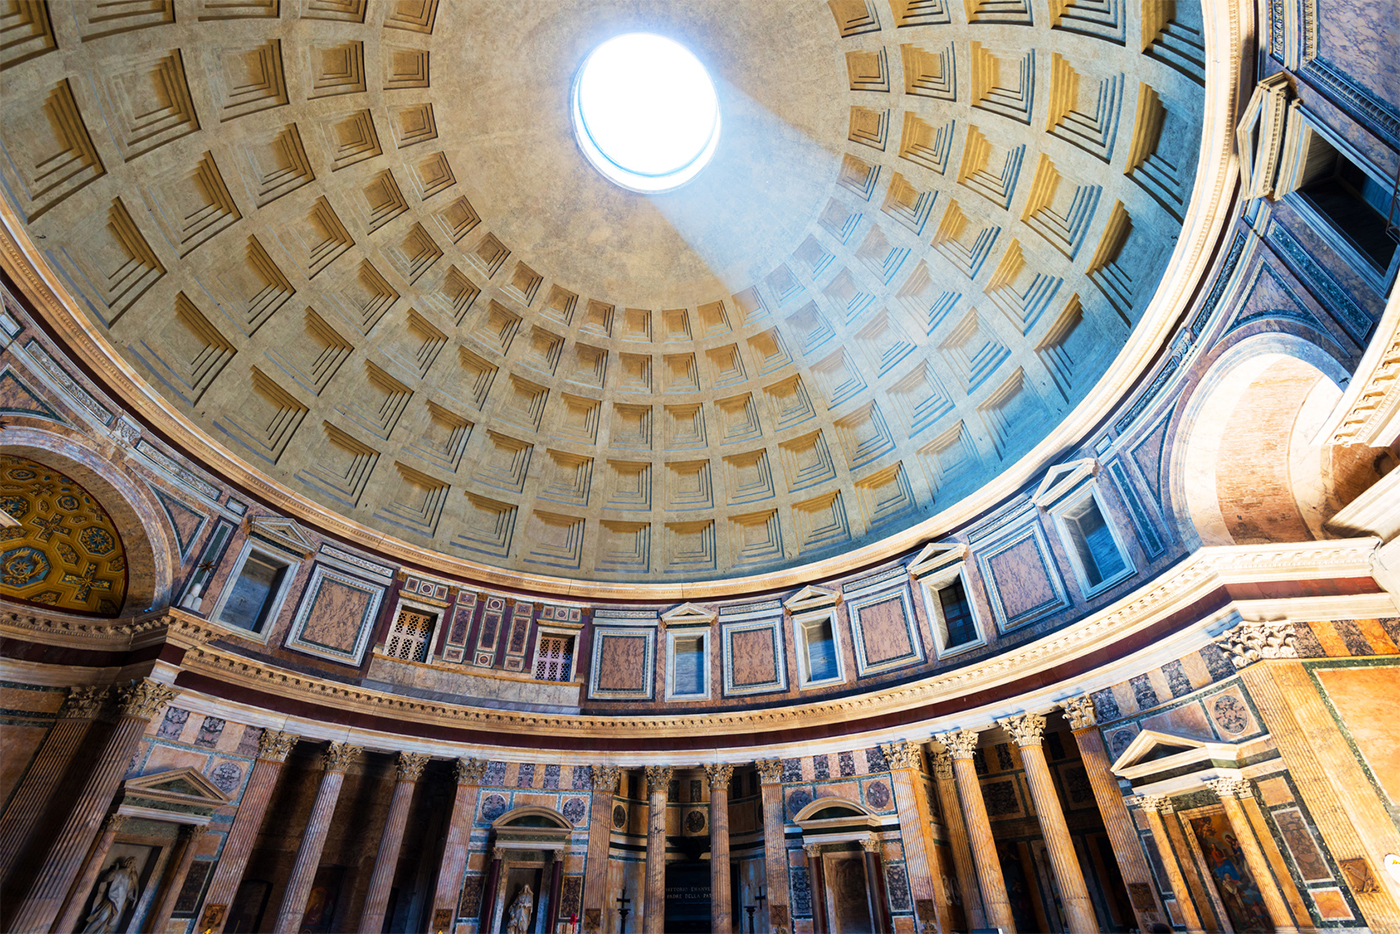 The striking perspective of the dome of the Pantheon with the light from the oculus